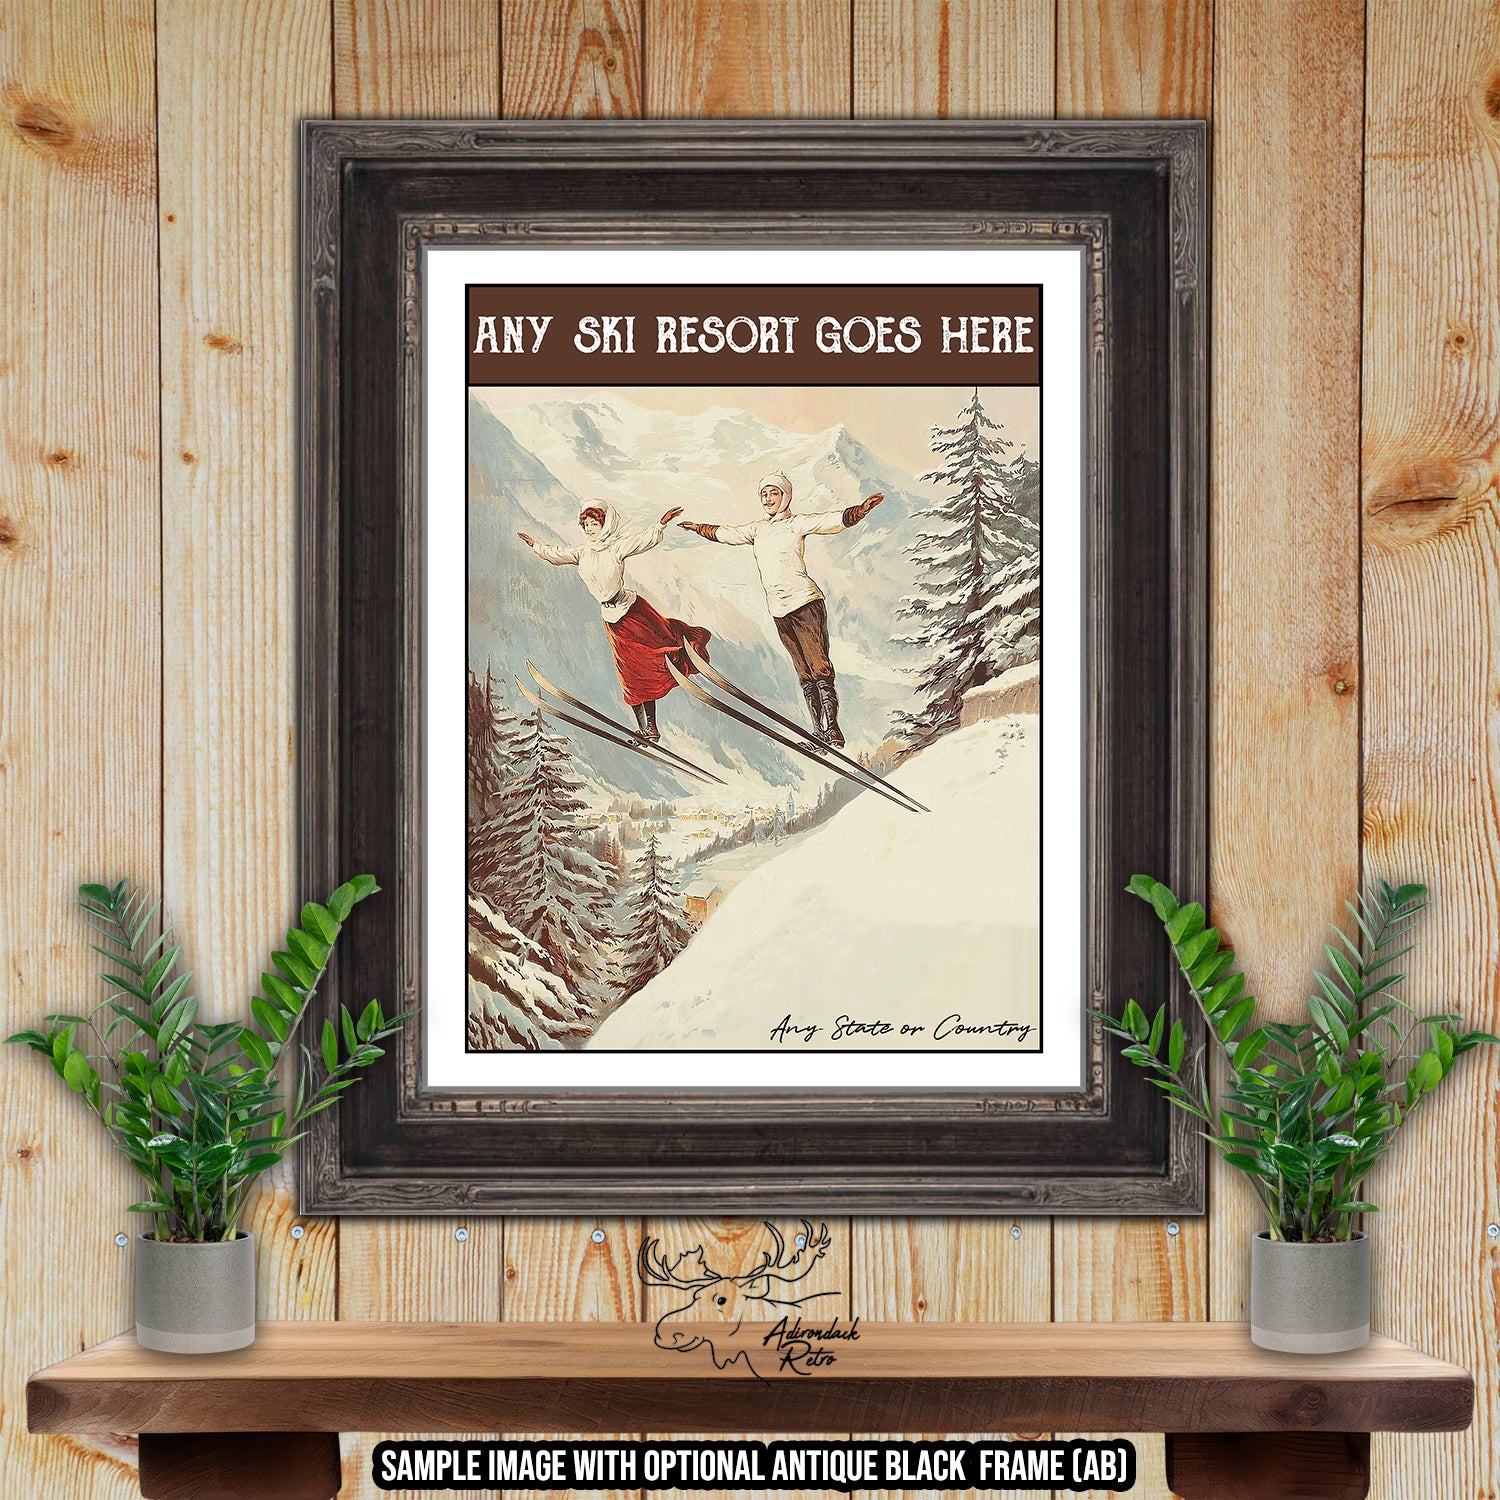 a picture of a man skiing on a snowy mountain